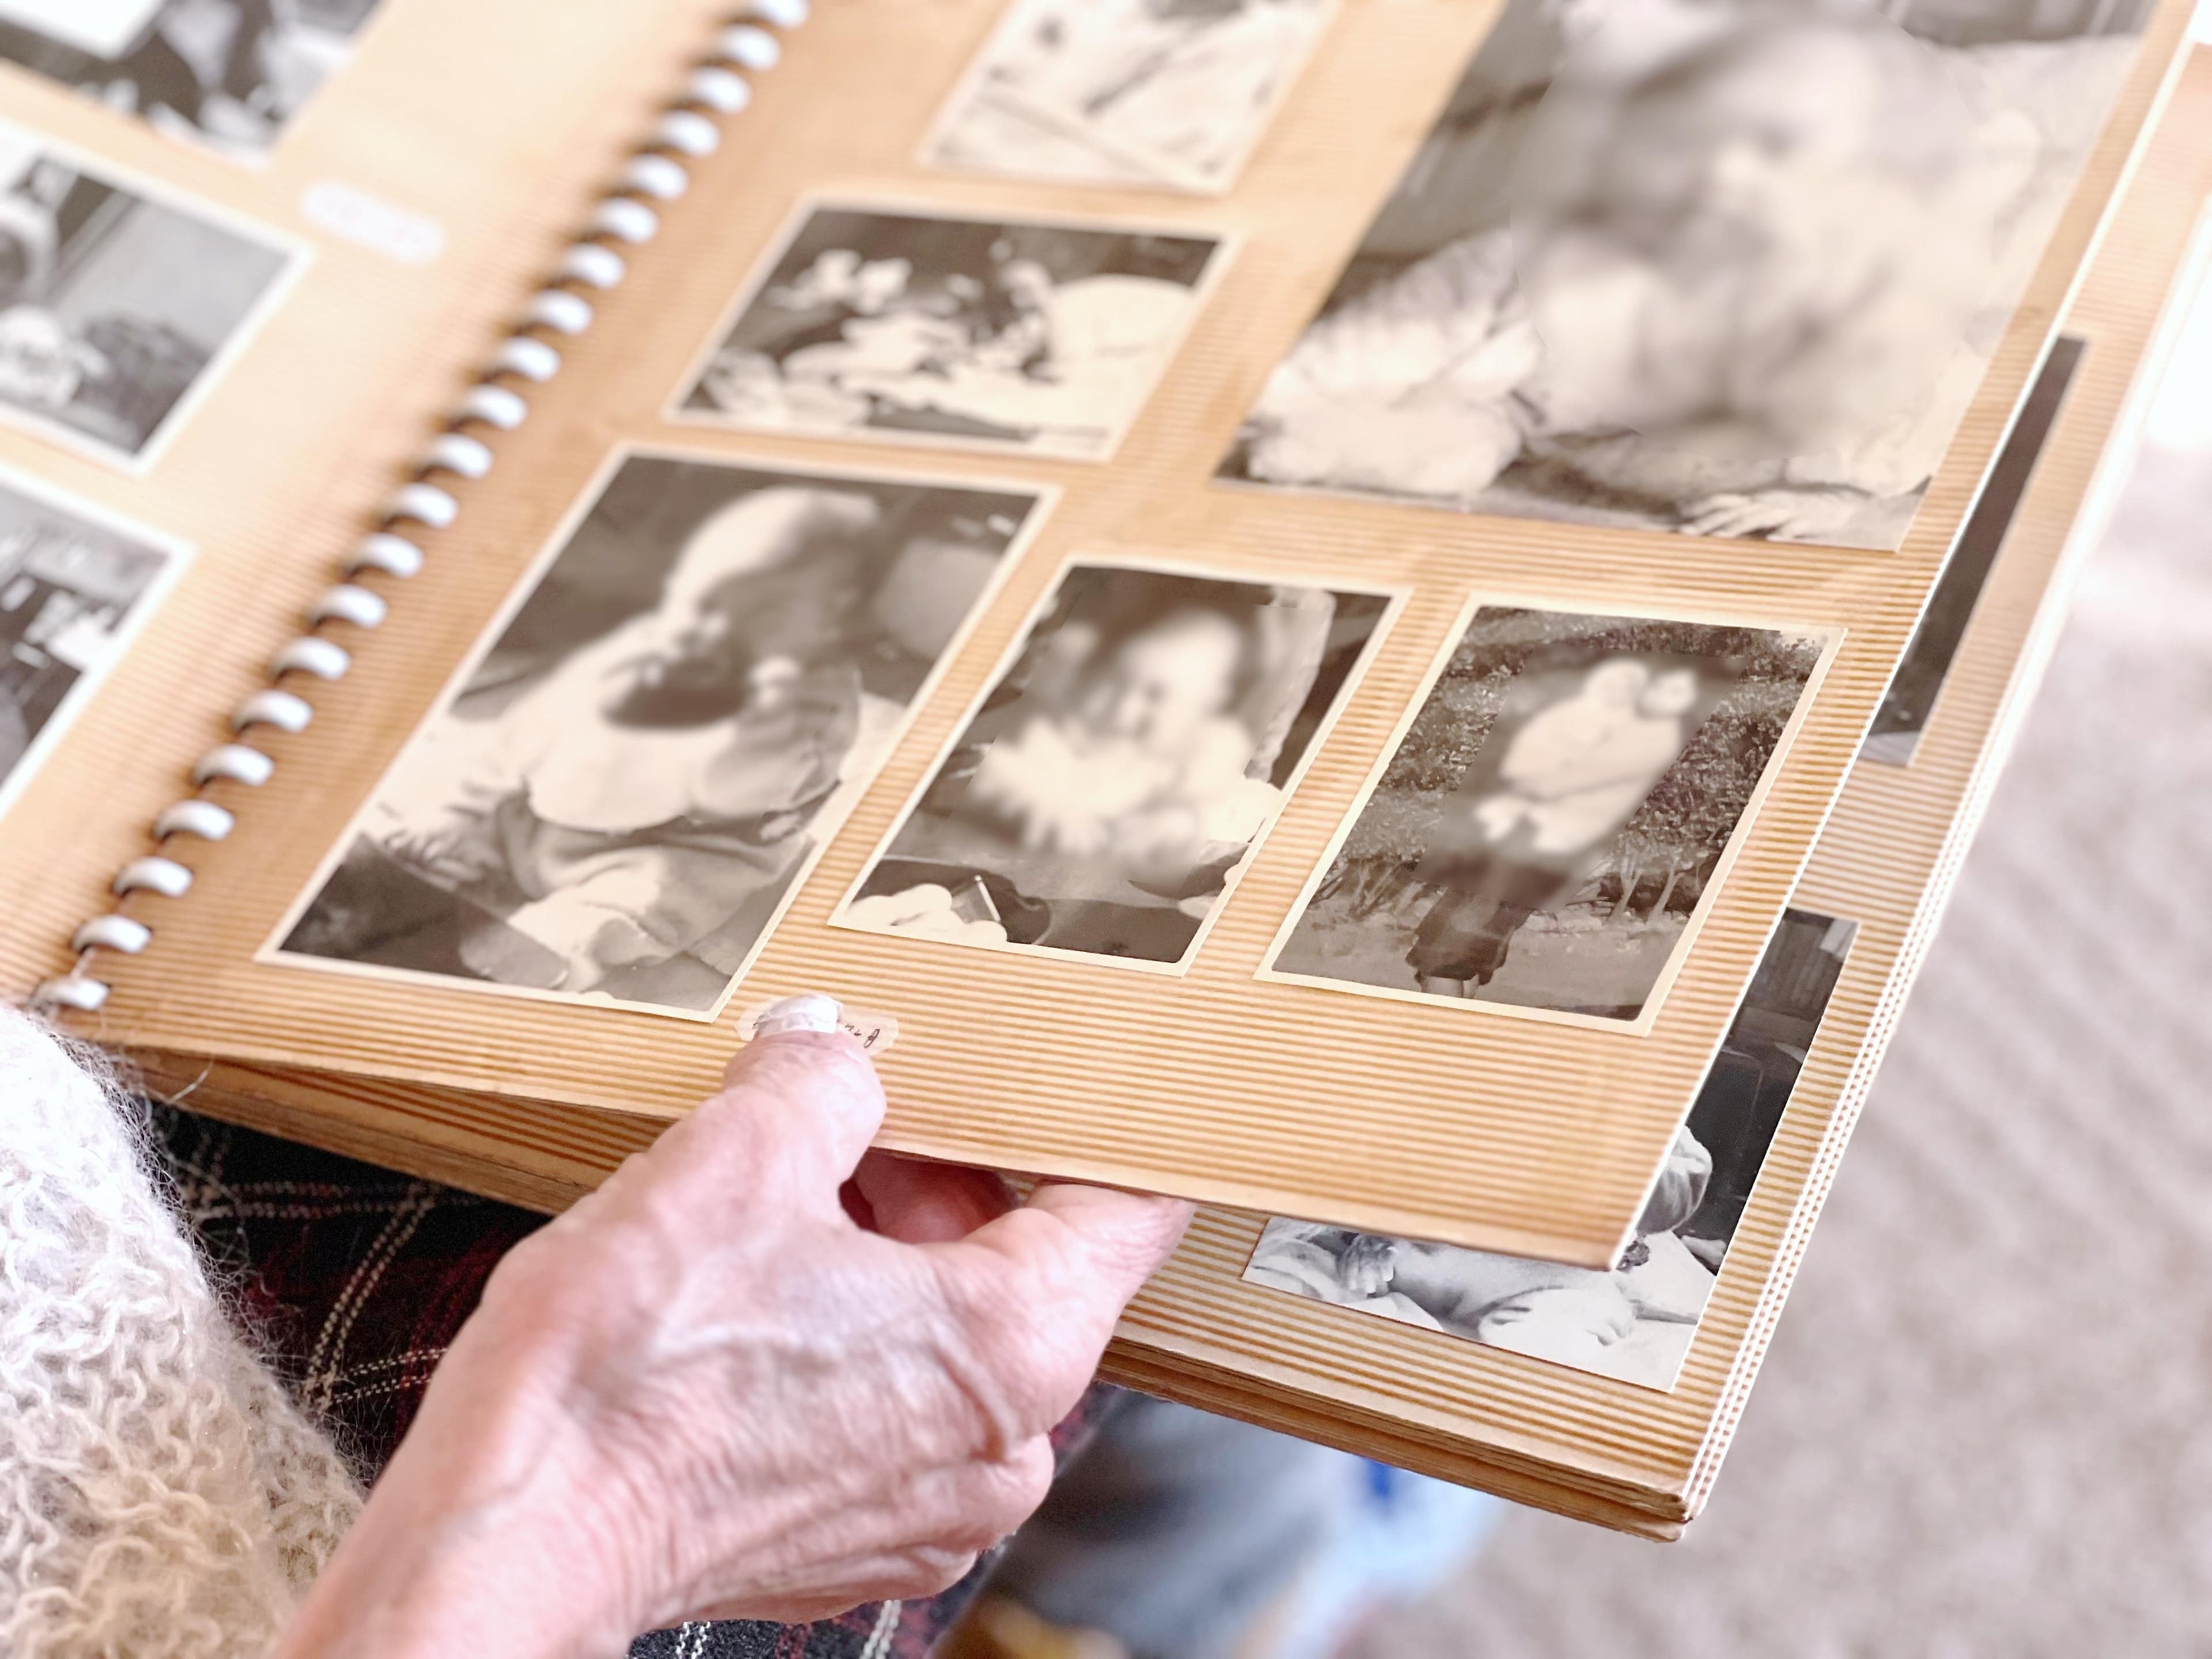 Elderly woman's hand looking at black and white photo album